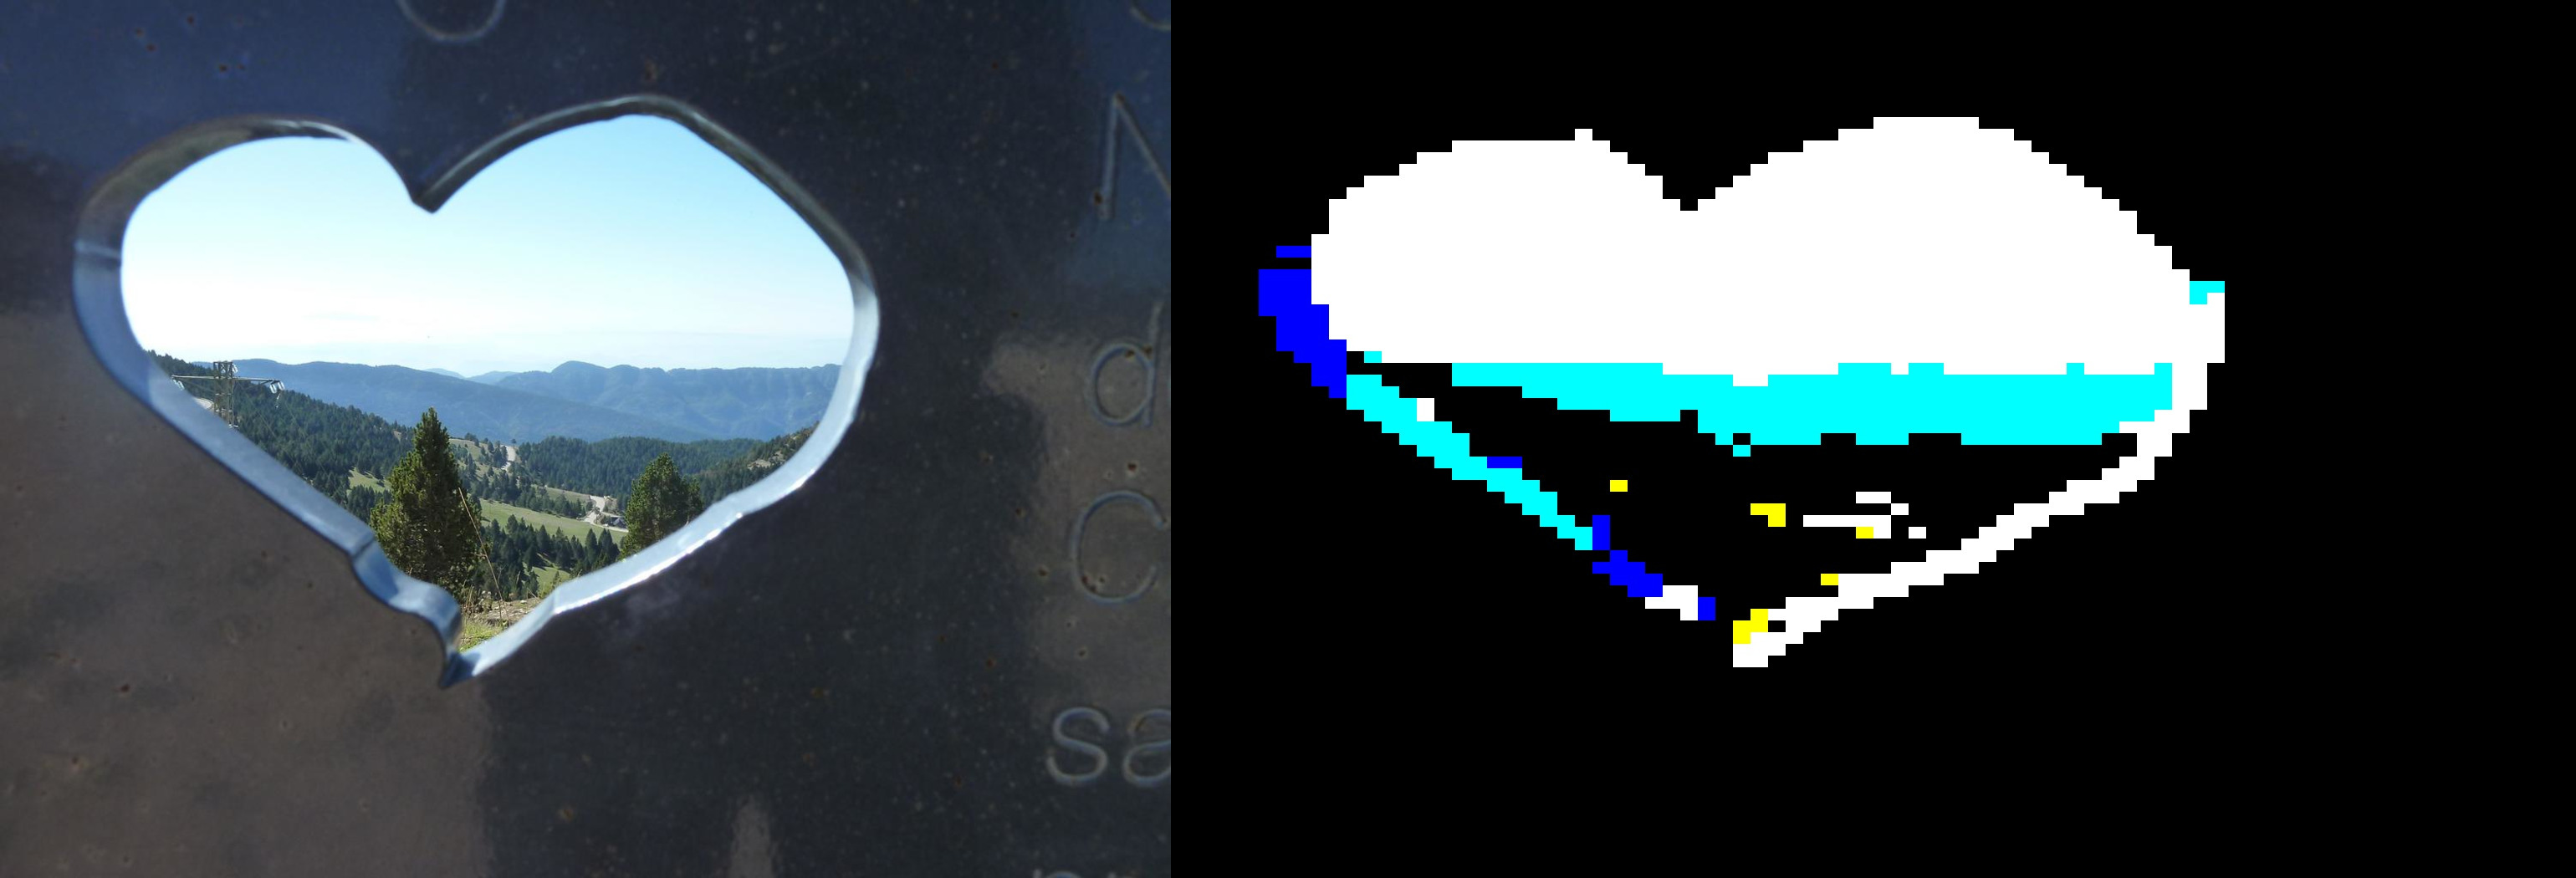 Skyheart, example image for Masquerain